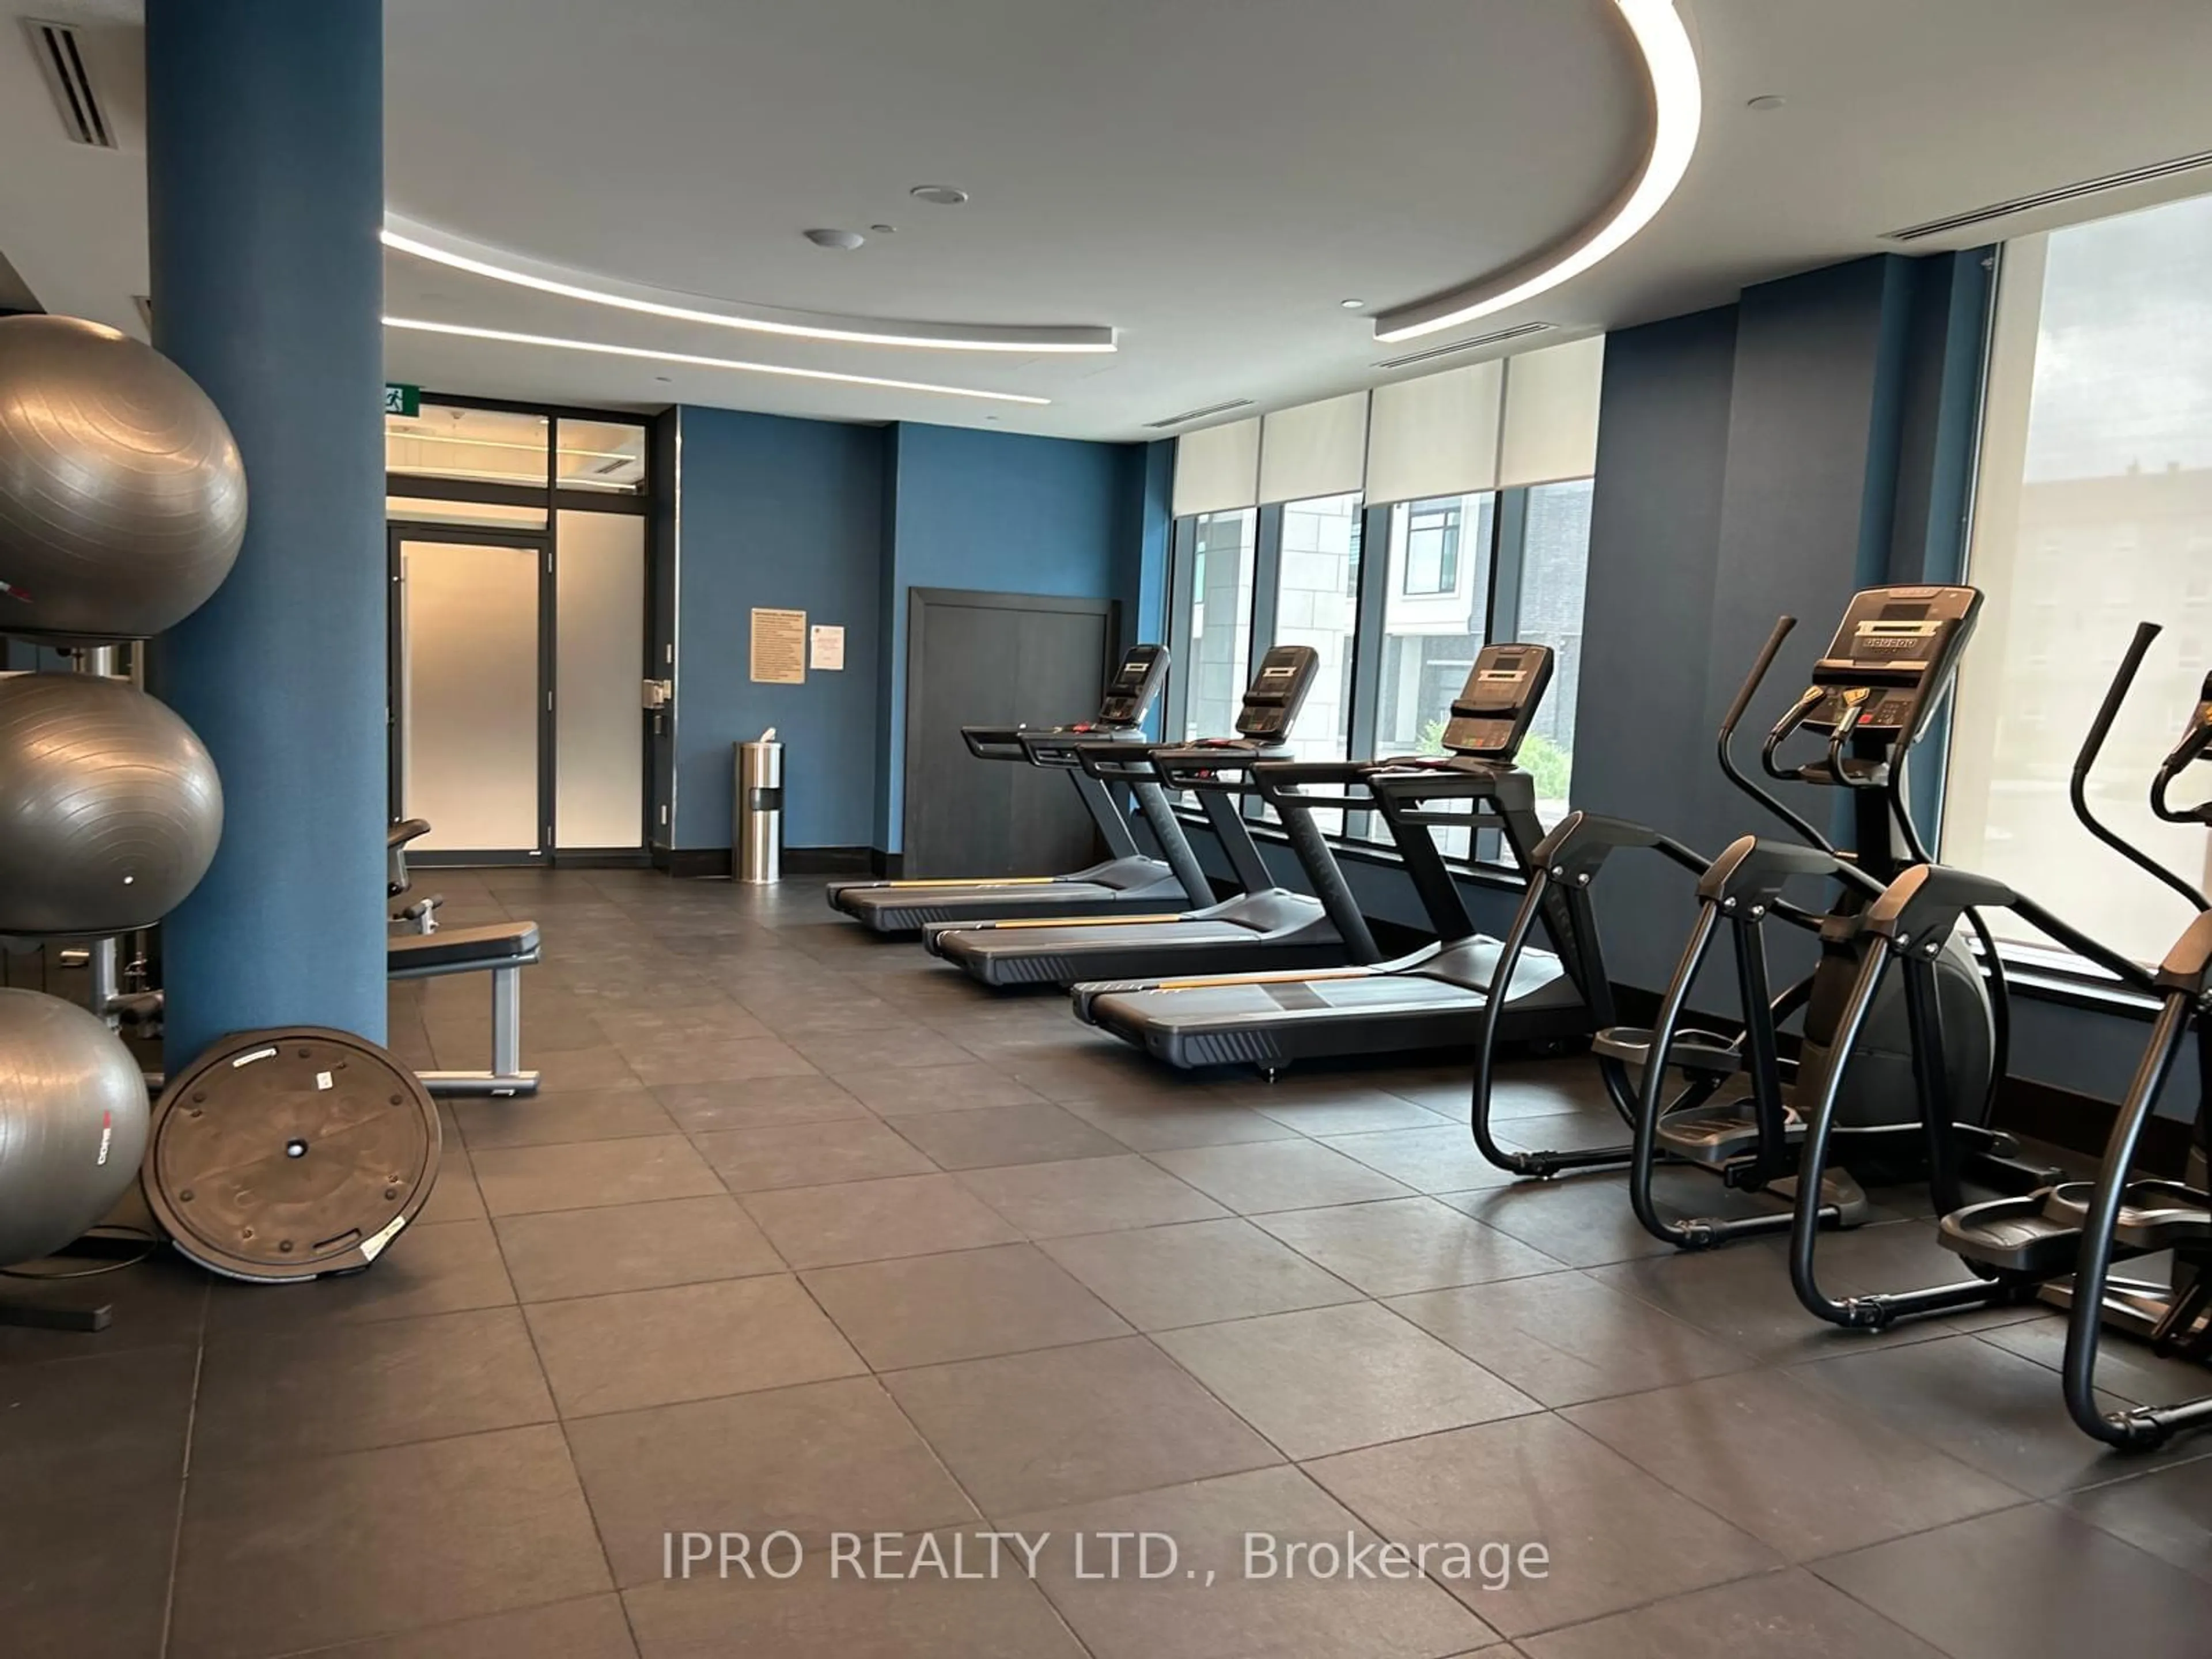 Gym or fitness room for 385 Winston Rd #207, Grimsby Ontario L3M 4E8